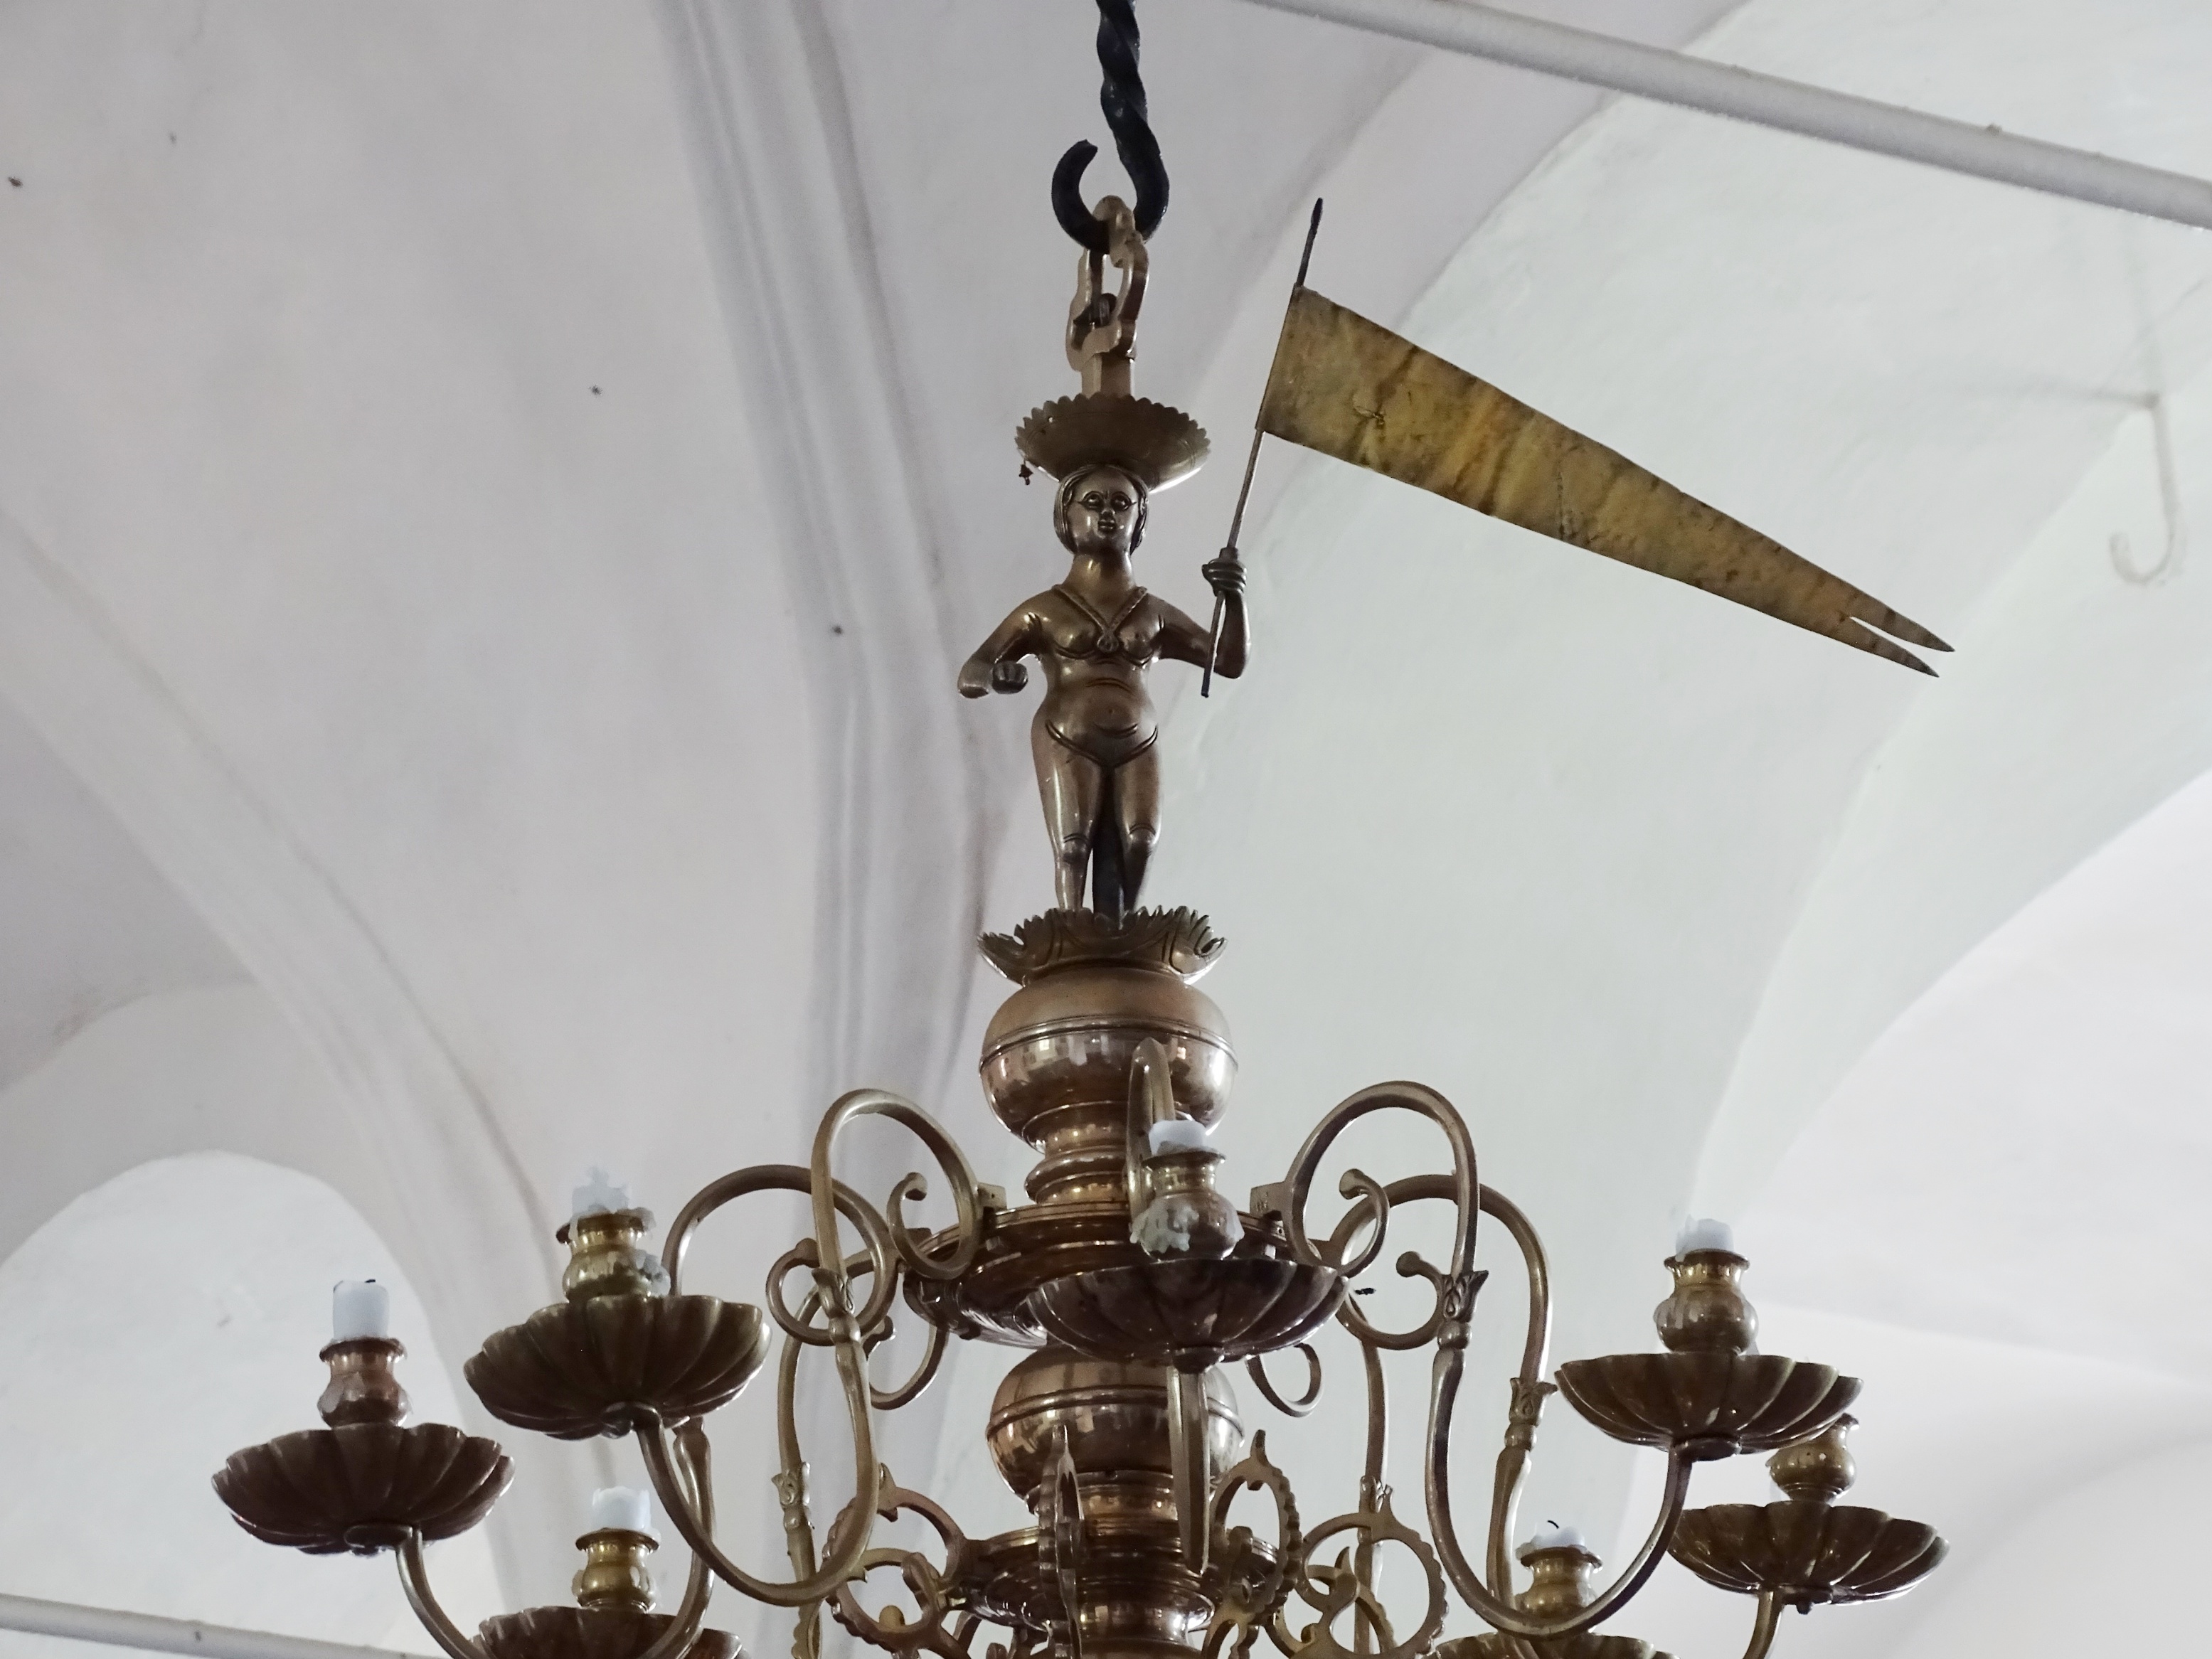 Fragment of the chandelier, 2nd half of 17th c.,  Nurme Evangelical Lutheran Church. Photo by Alantė Valtaitė-Gagač, 2021